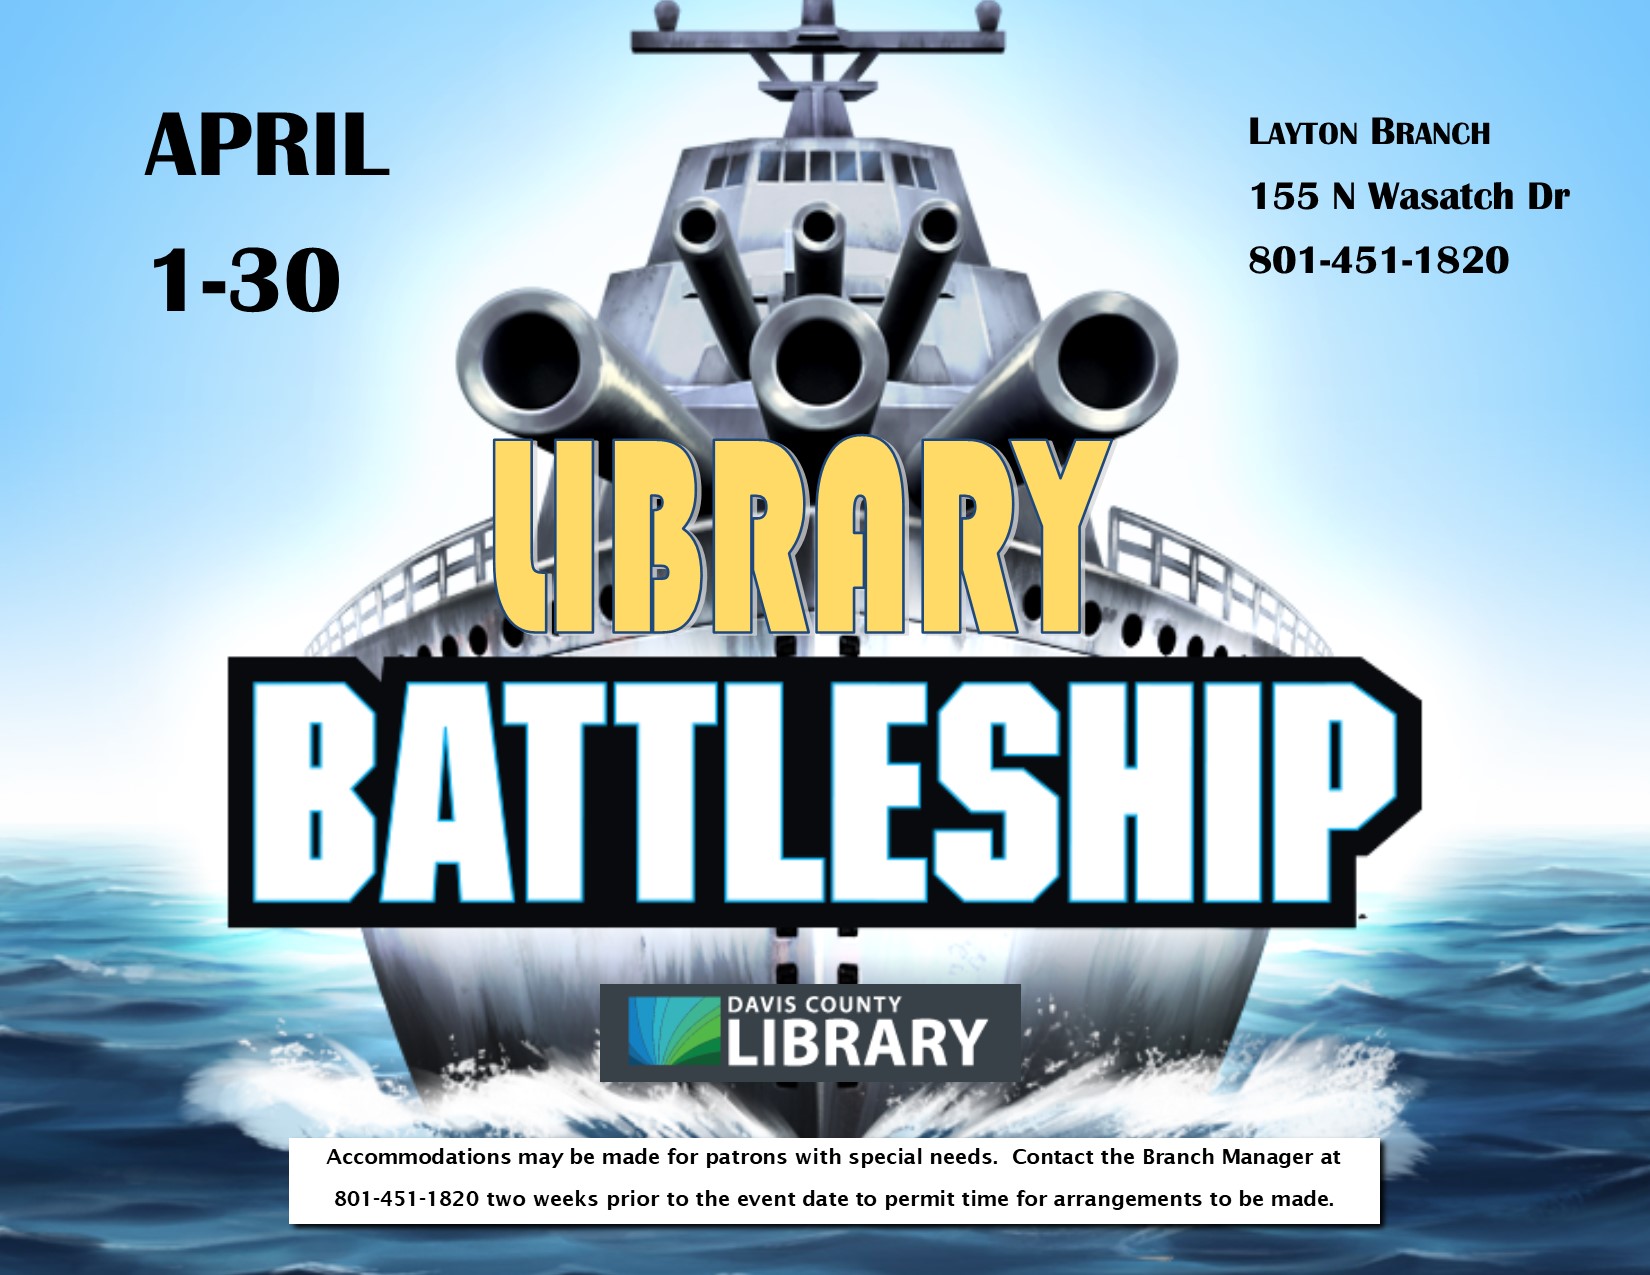 Library Battleship at the Layton Library. April 1st through the 30th.